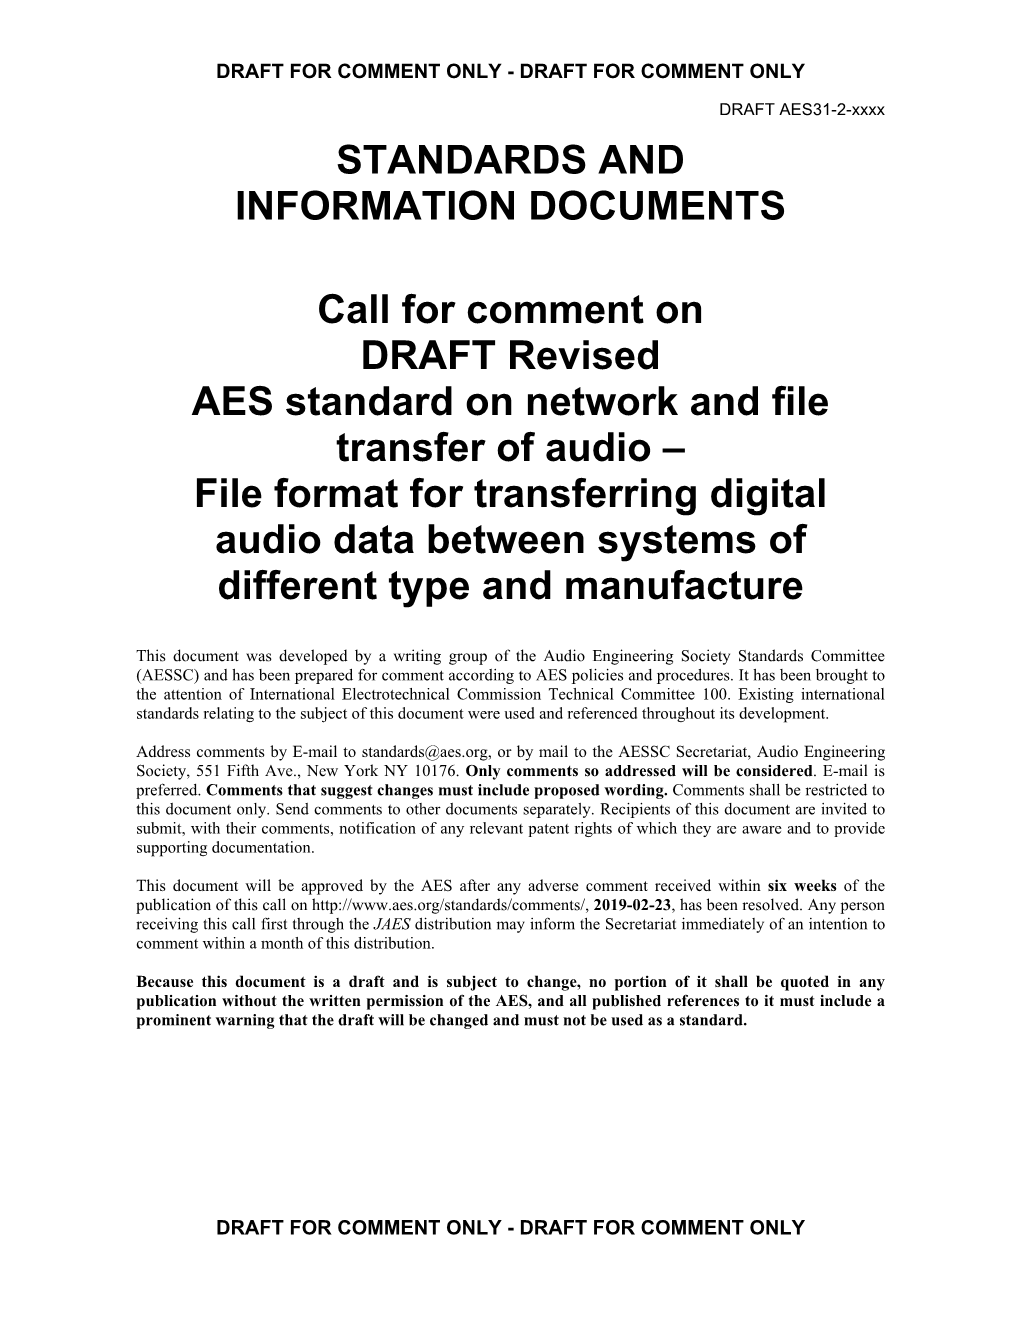 Call for Comment on DRAFT Revised AES